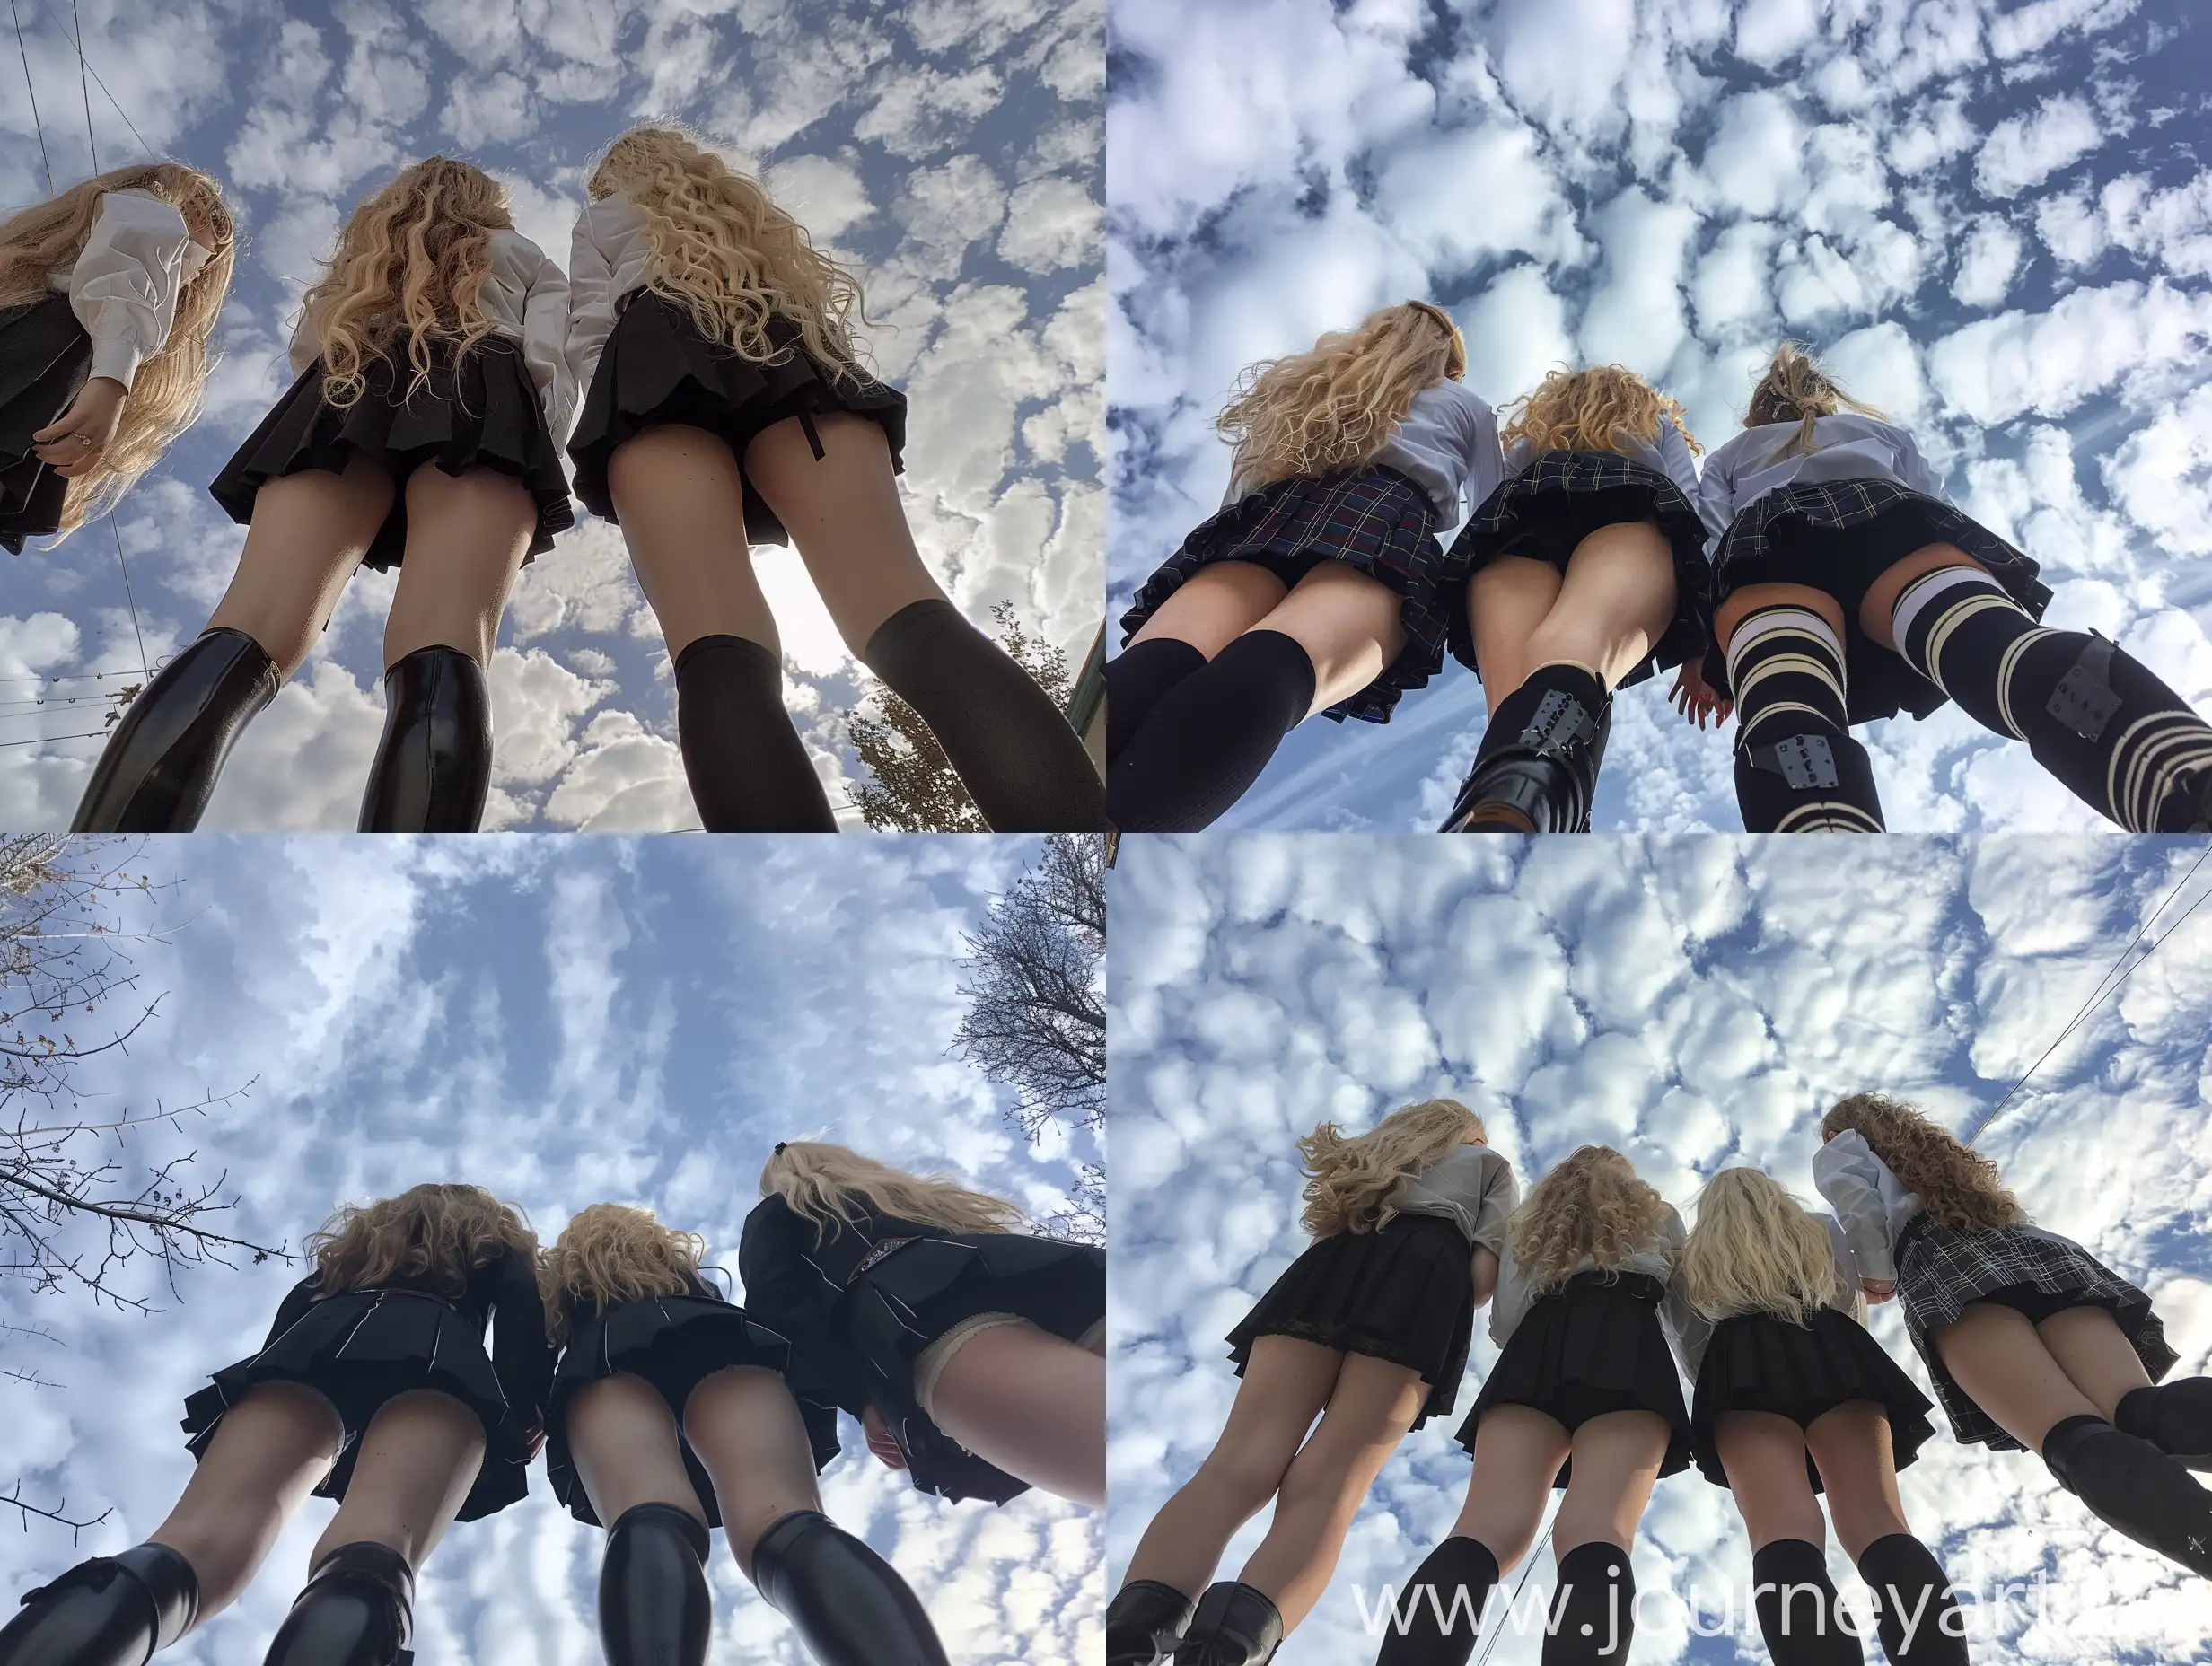 4 girls, blonde hair, 22 years old, back, school uniform,  black boots, curvy, fat legs, ,  no effects, selfie , iphone selfie, no filters, natural ,
 iphone photo natural, camera down angle, sky view, down view